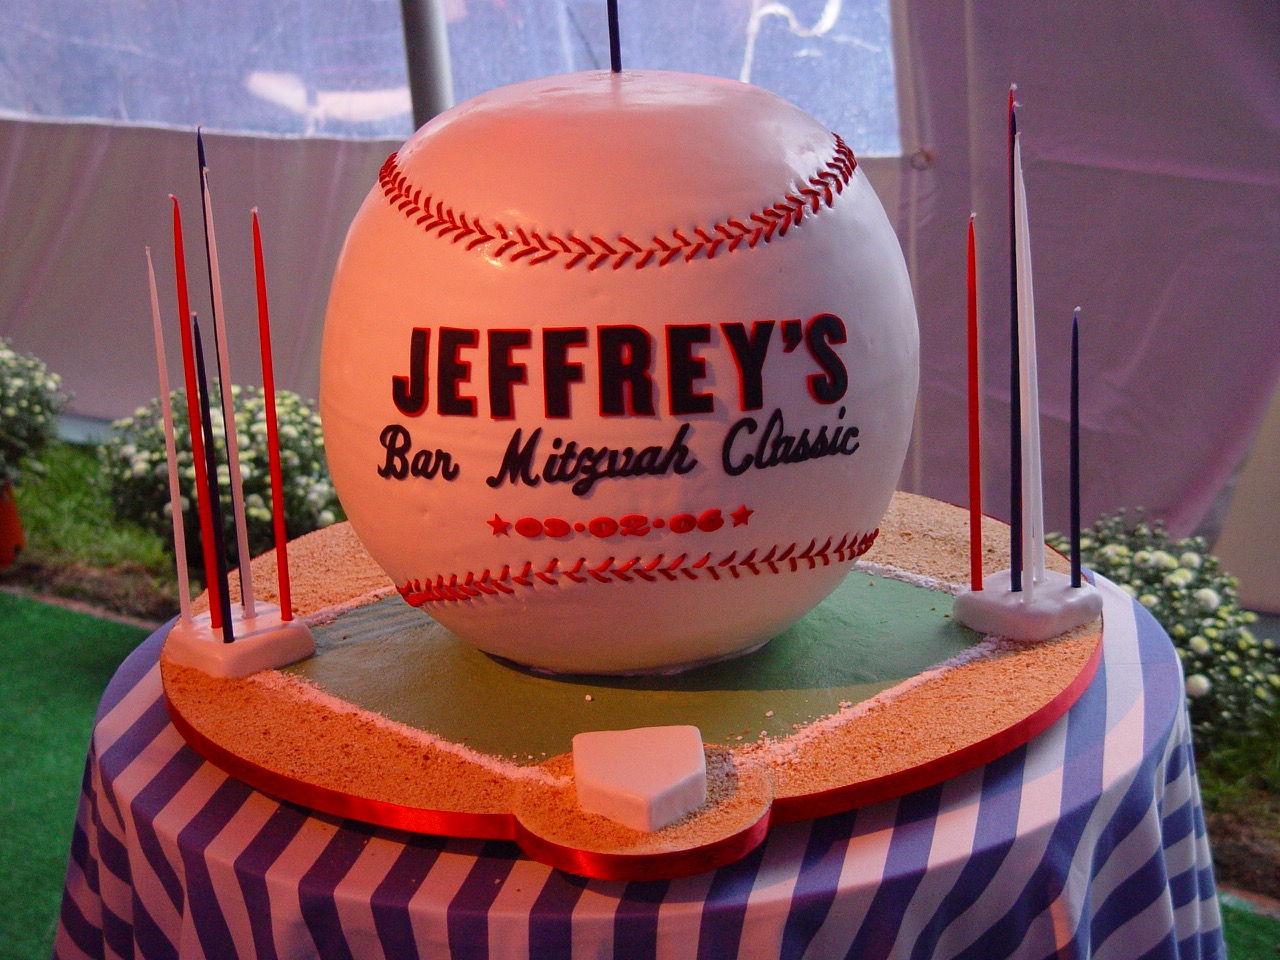 Sports Theme Centerpieces Decor and Lighting by Eggsotic Events NJ Event Design and Decor Rental  - 3.jpg